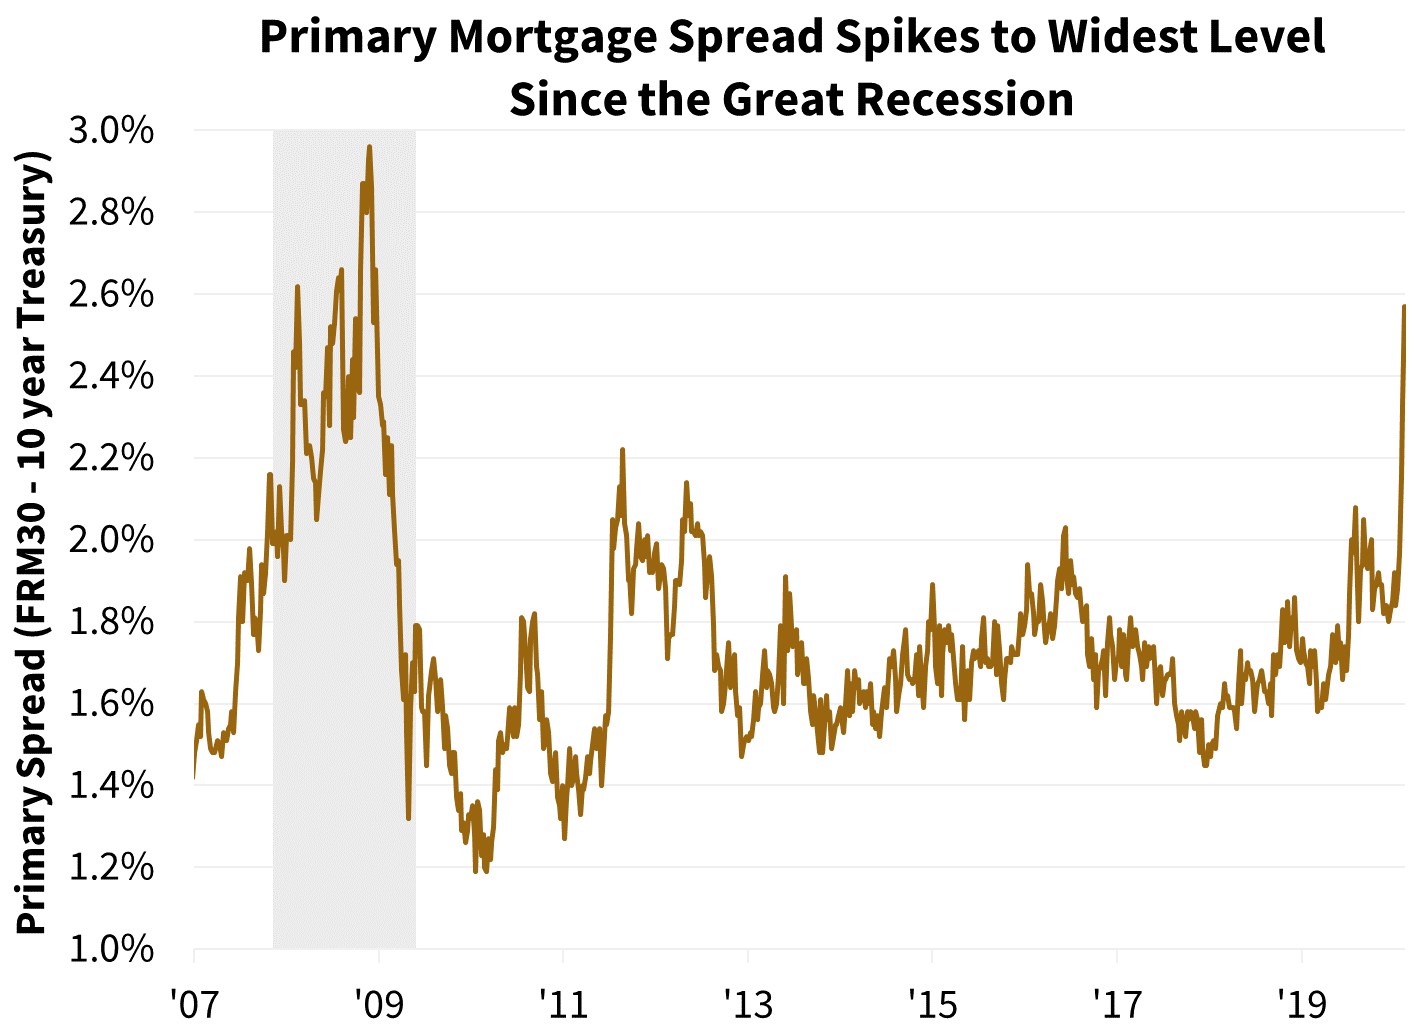  Primary Mortgage Spread Spikes to Widest Level Since the Great Recession 